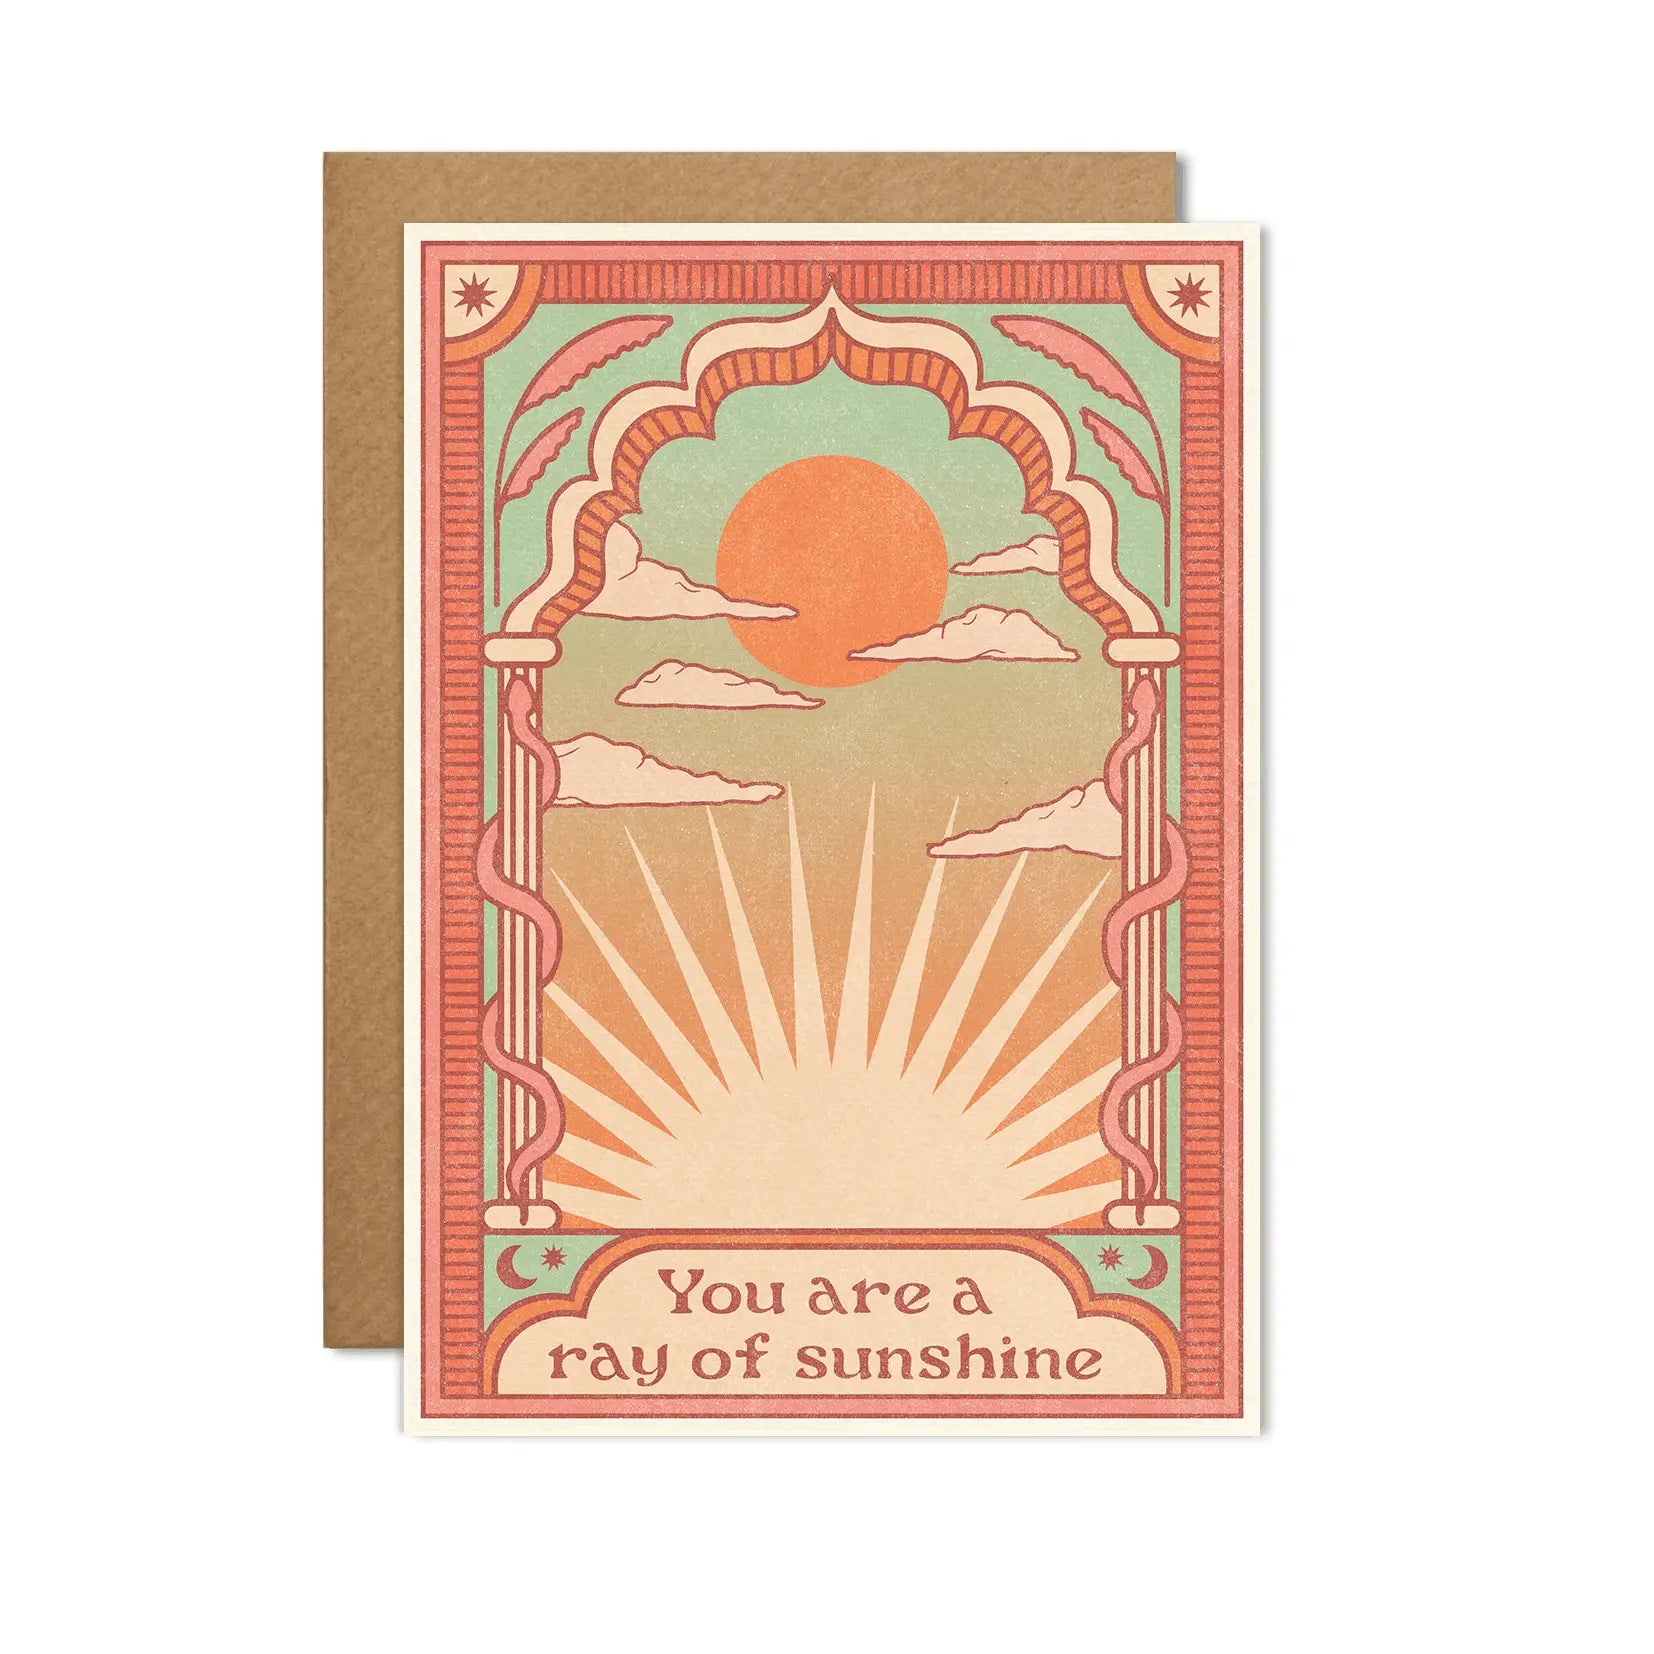 Cai & Jo “You Are a Ray of Sunshine” Card